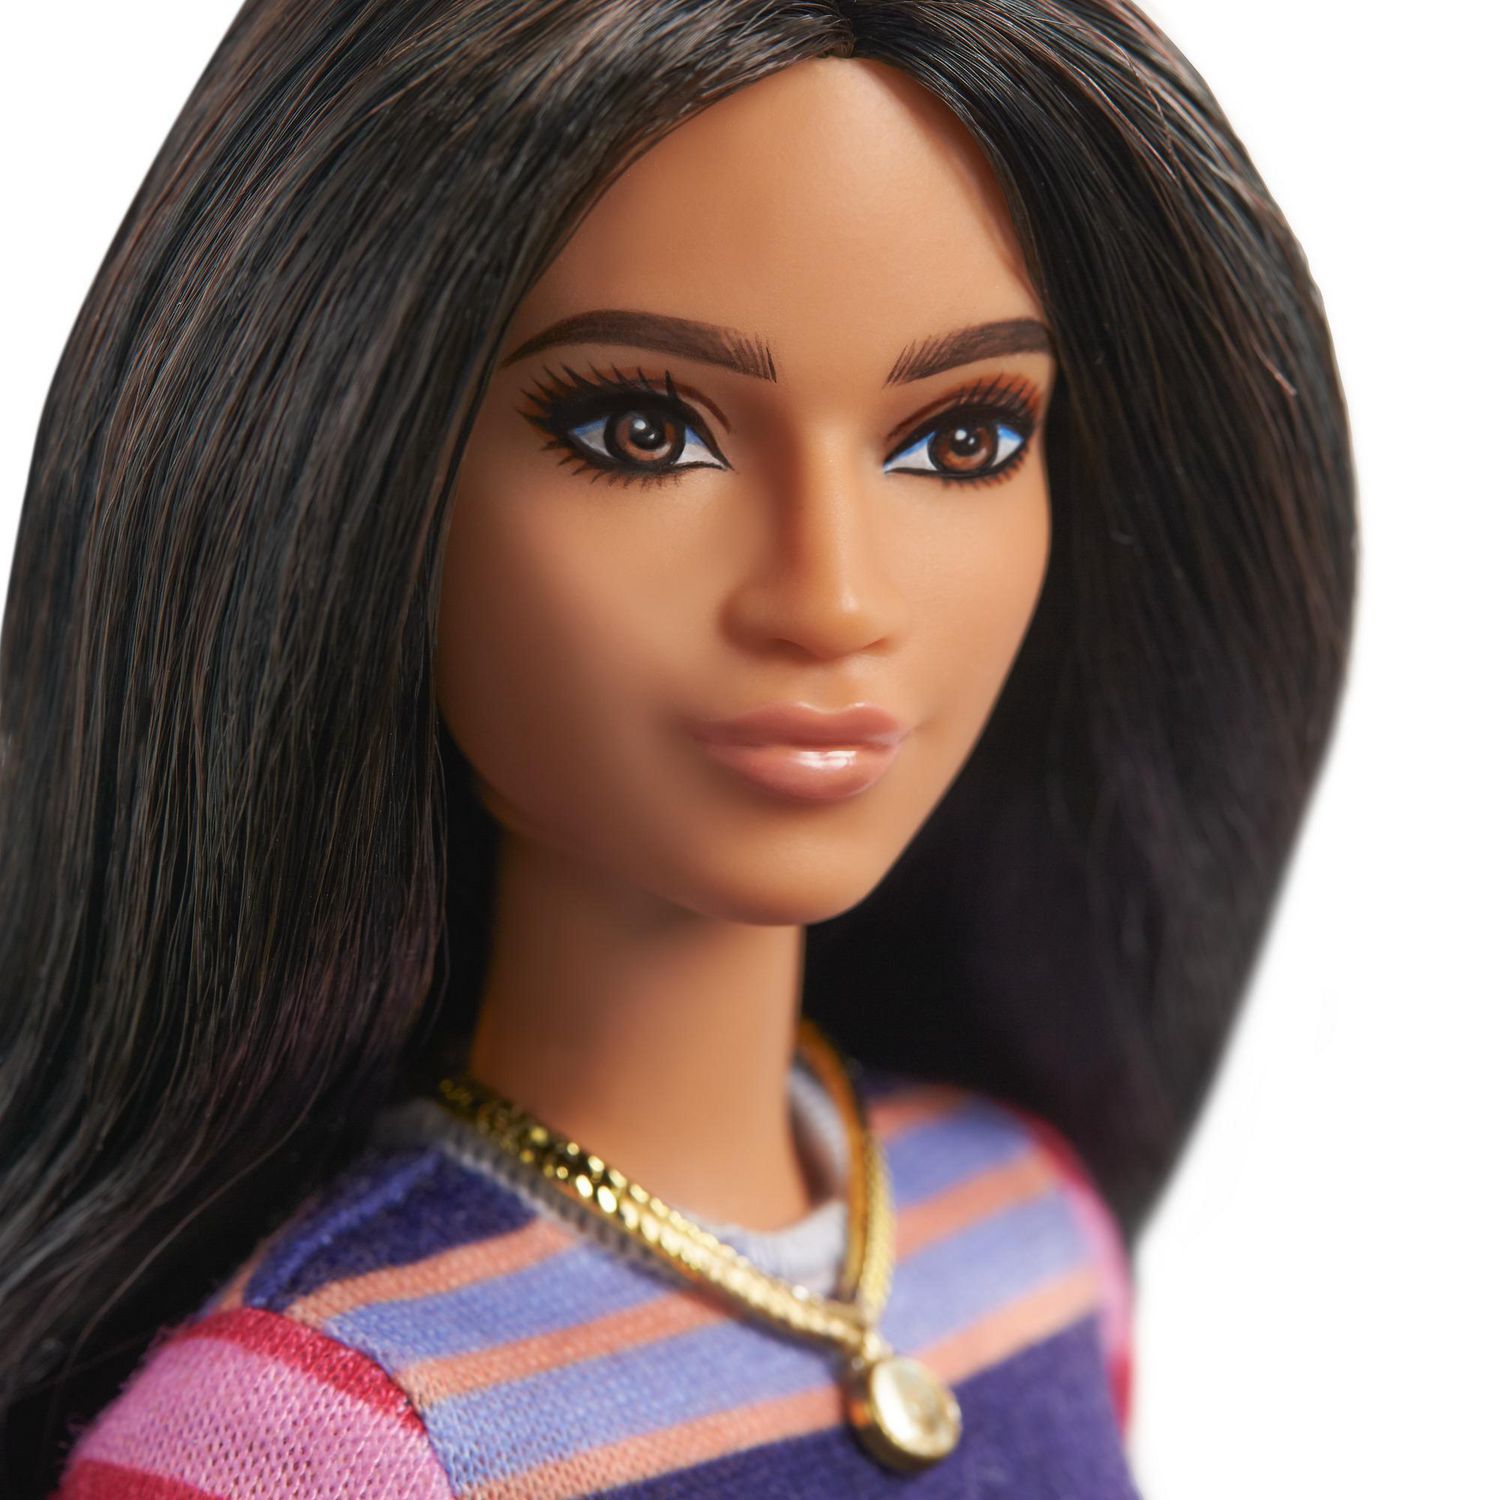 Barbie Fashionistas Doll #140 with Long Brunette Hair Wearing